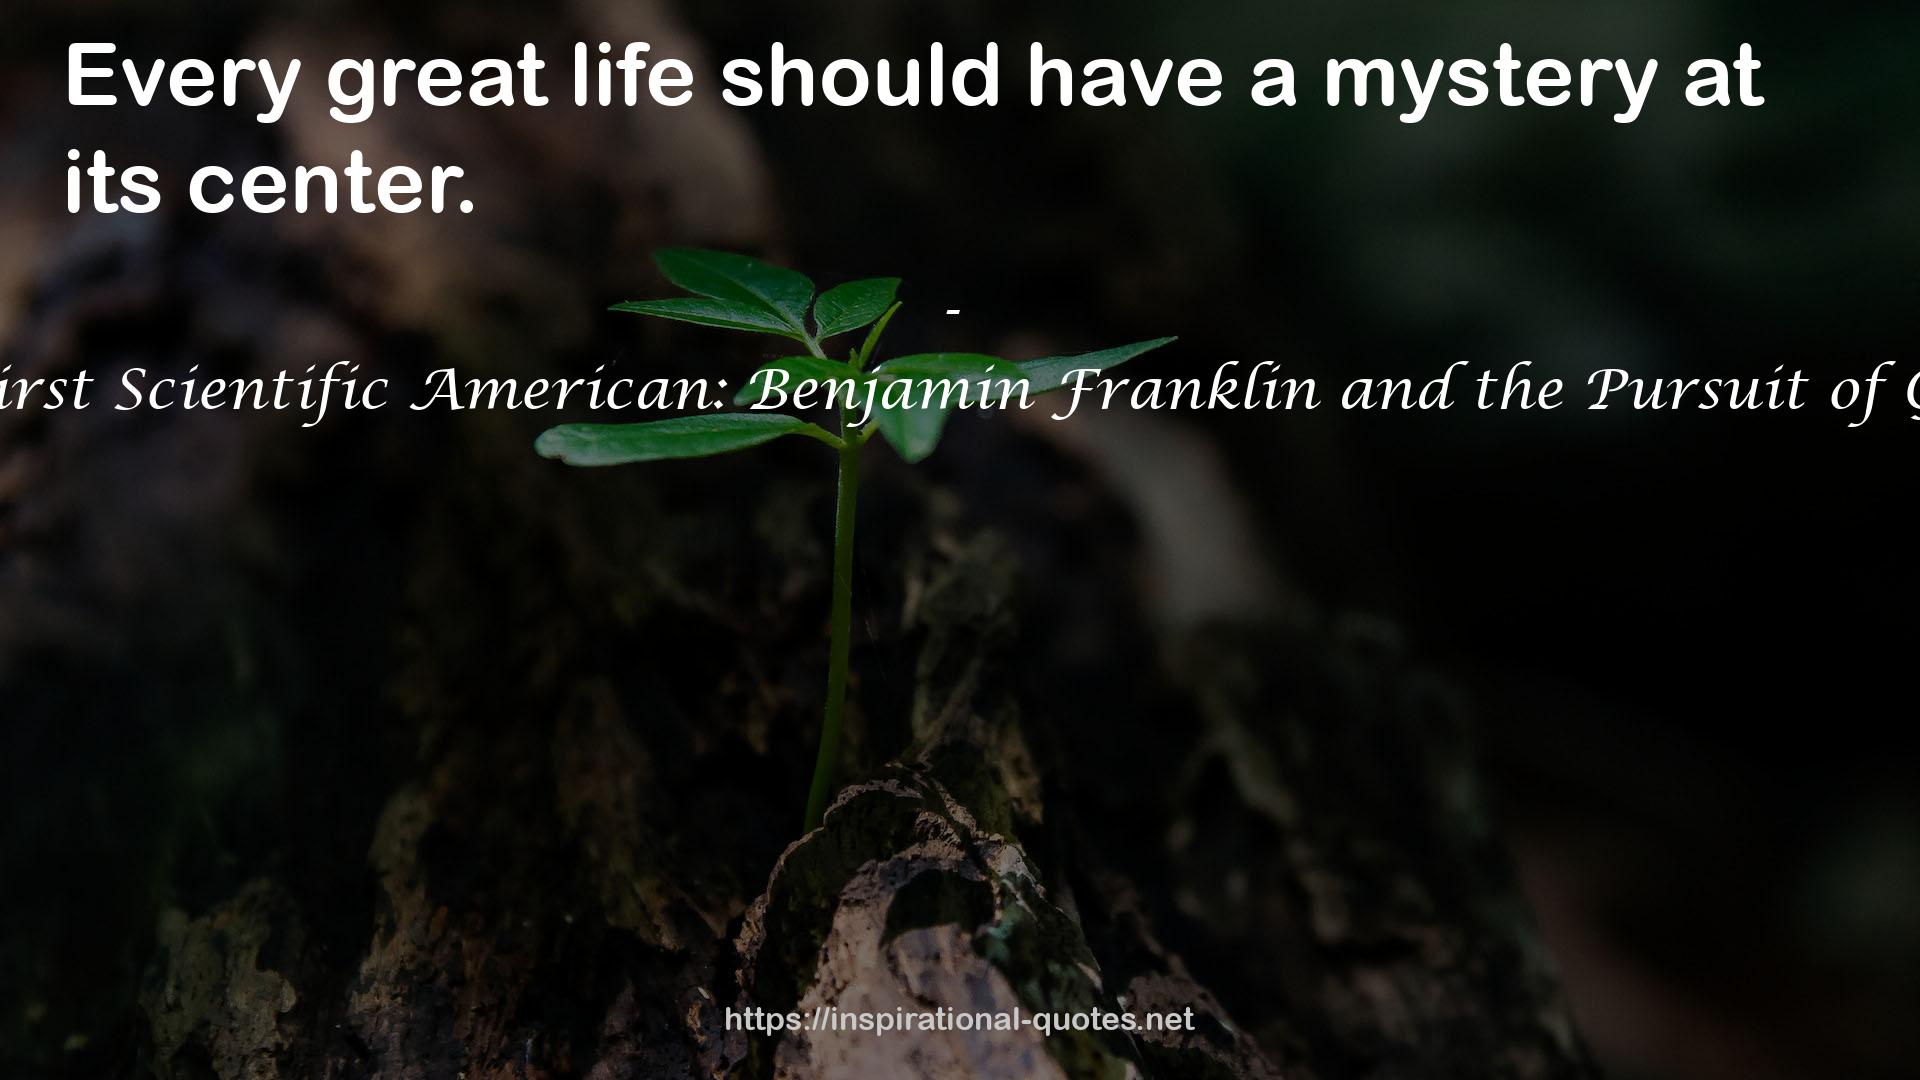 The First Scientific American: Benjamin Franklin and the Pursuit of Genius QUOTES